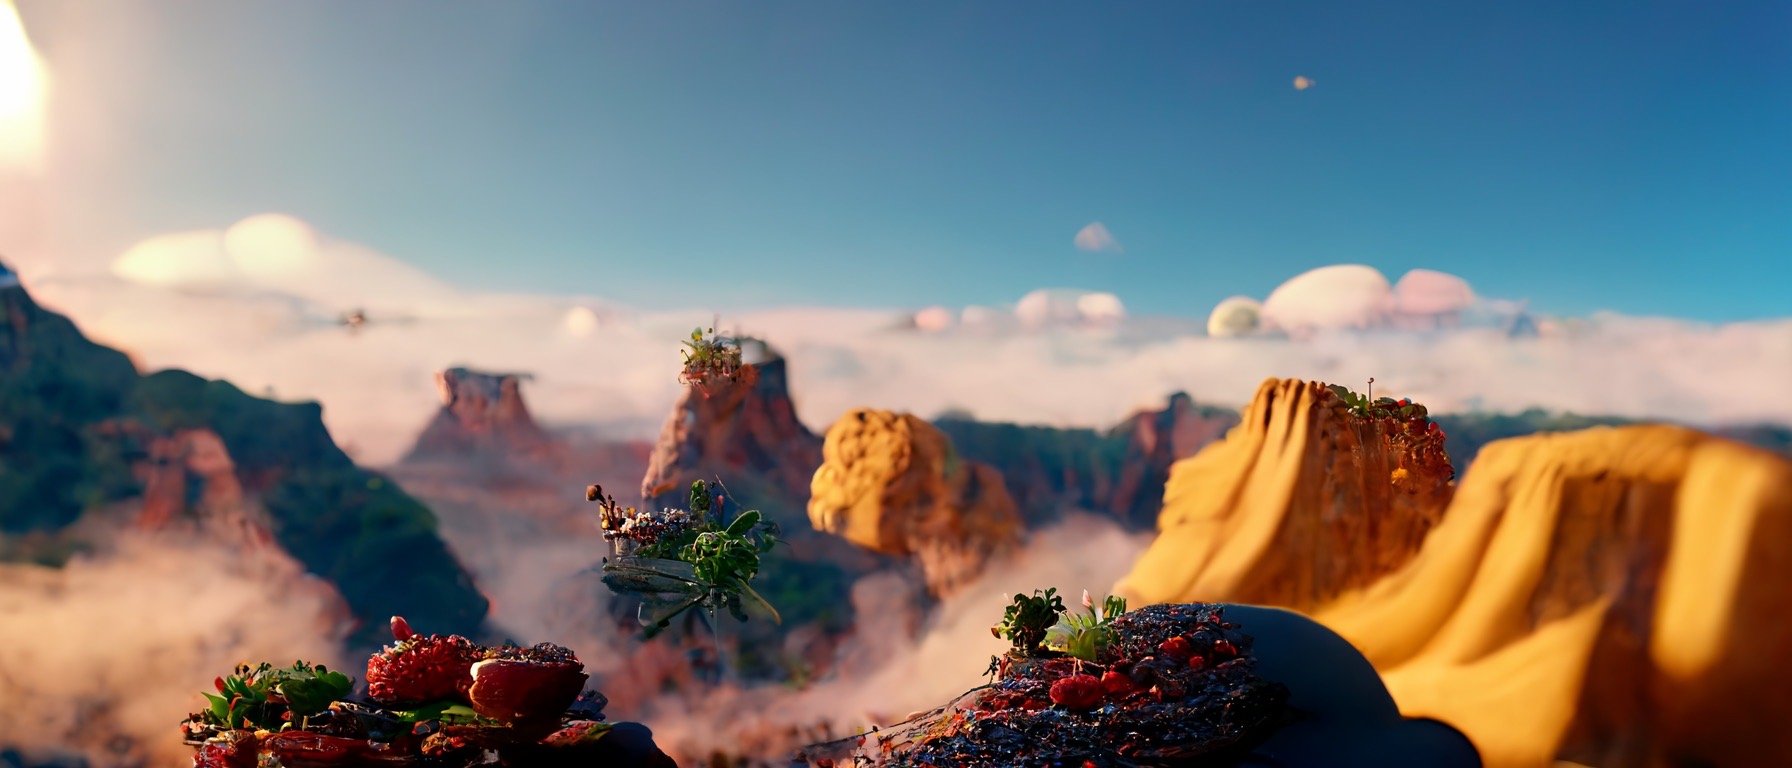 f374f64e-2e12-4d98-a5cd-673a748e20d3_S3RAPH_epic_dessert_scene_Distant_view_with_intricate_details._foreground_with_plants_and_critters._cinemat.JPG